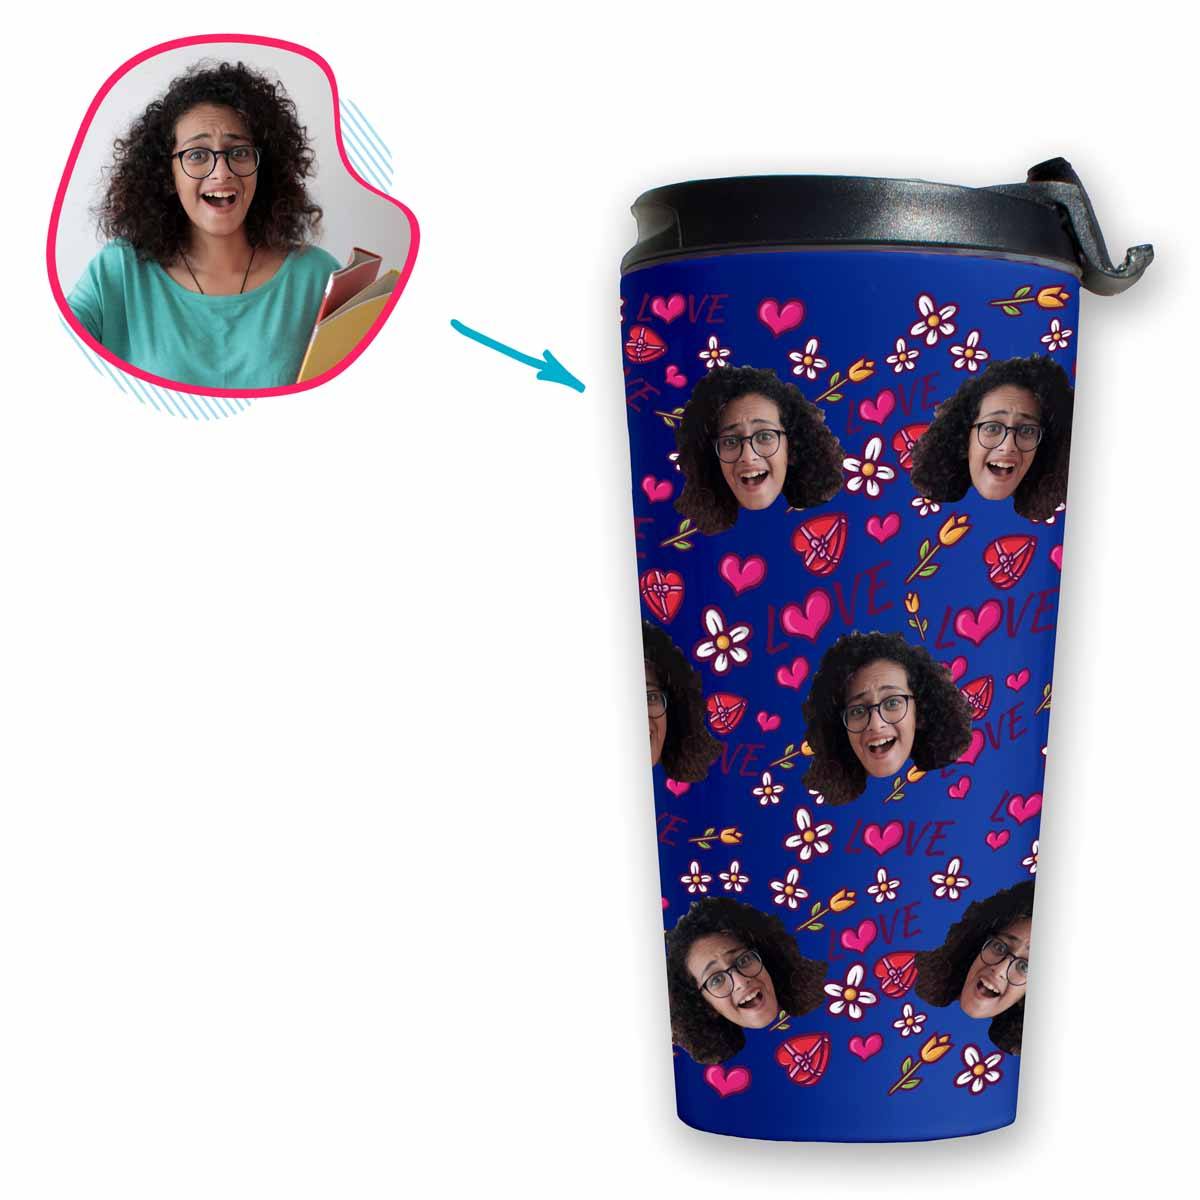 darkblue Hearts and Flowers travel mug personalized with photo of face printed on it